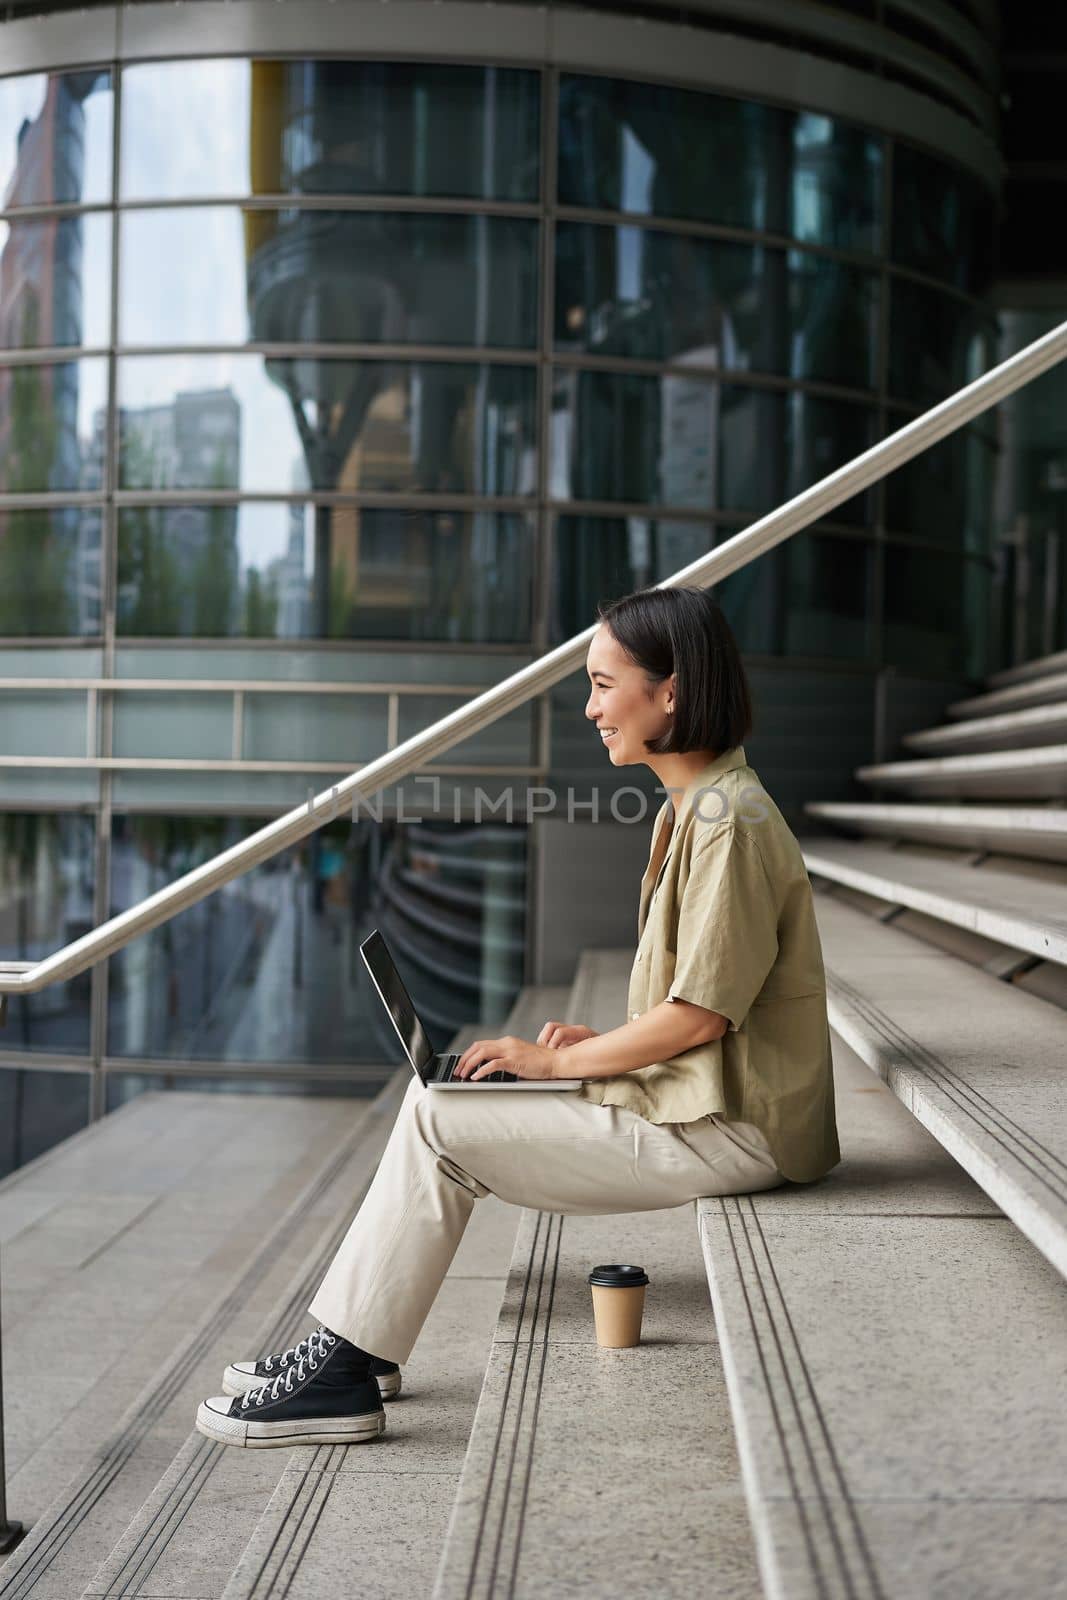 Profile portrait of young asian woman with laptop, girl student sits on stairs outside building and types on computer, drinks takeaway coffee.